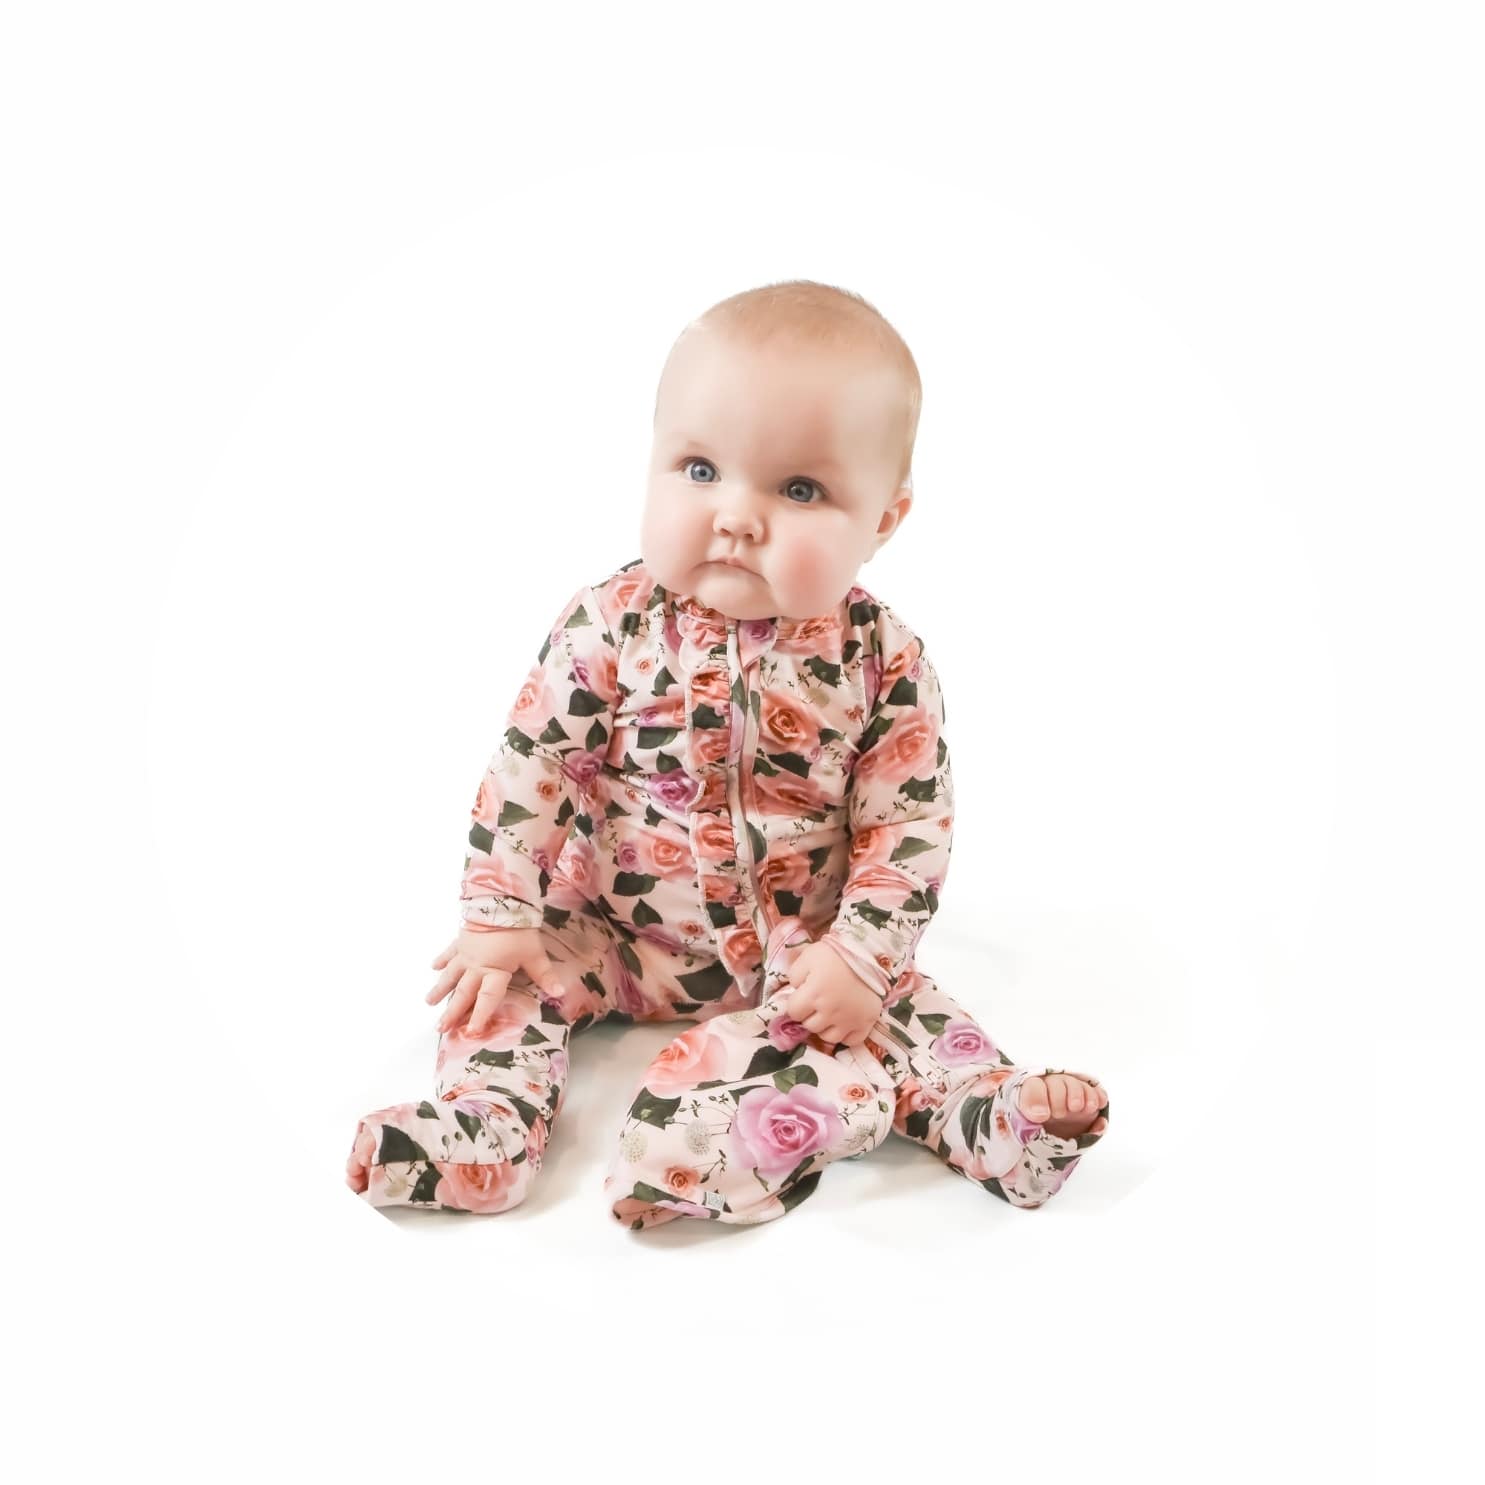 Baby girl wearing toddler clothes in floral pattern 